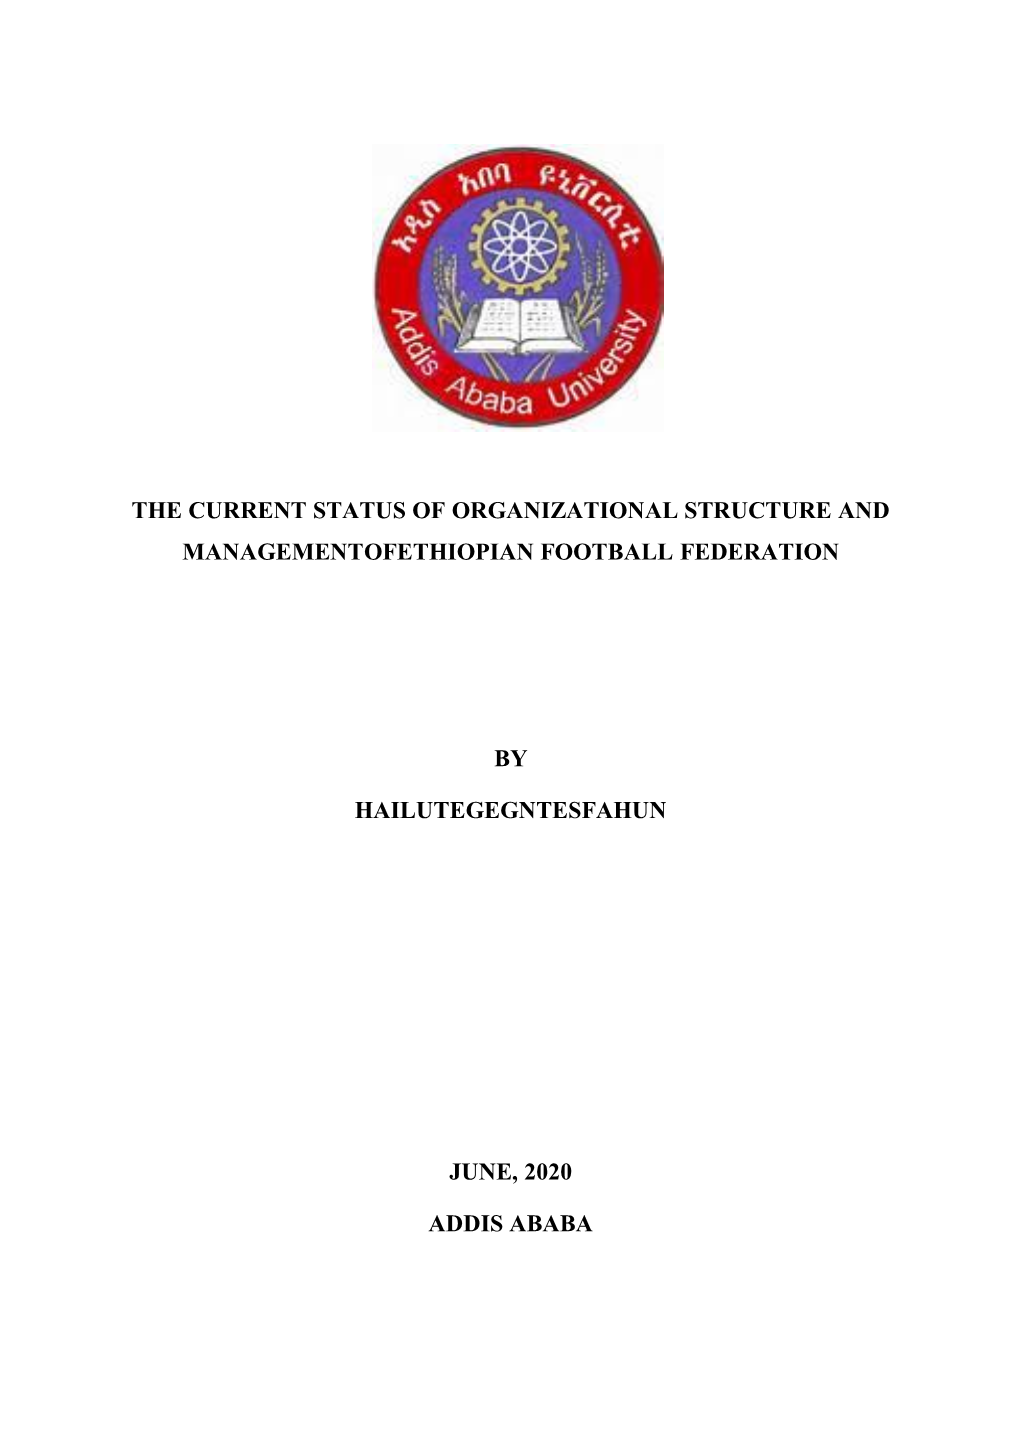 The Current Status of Organizational Structure and Managementofethiopian Football Federation